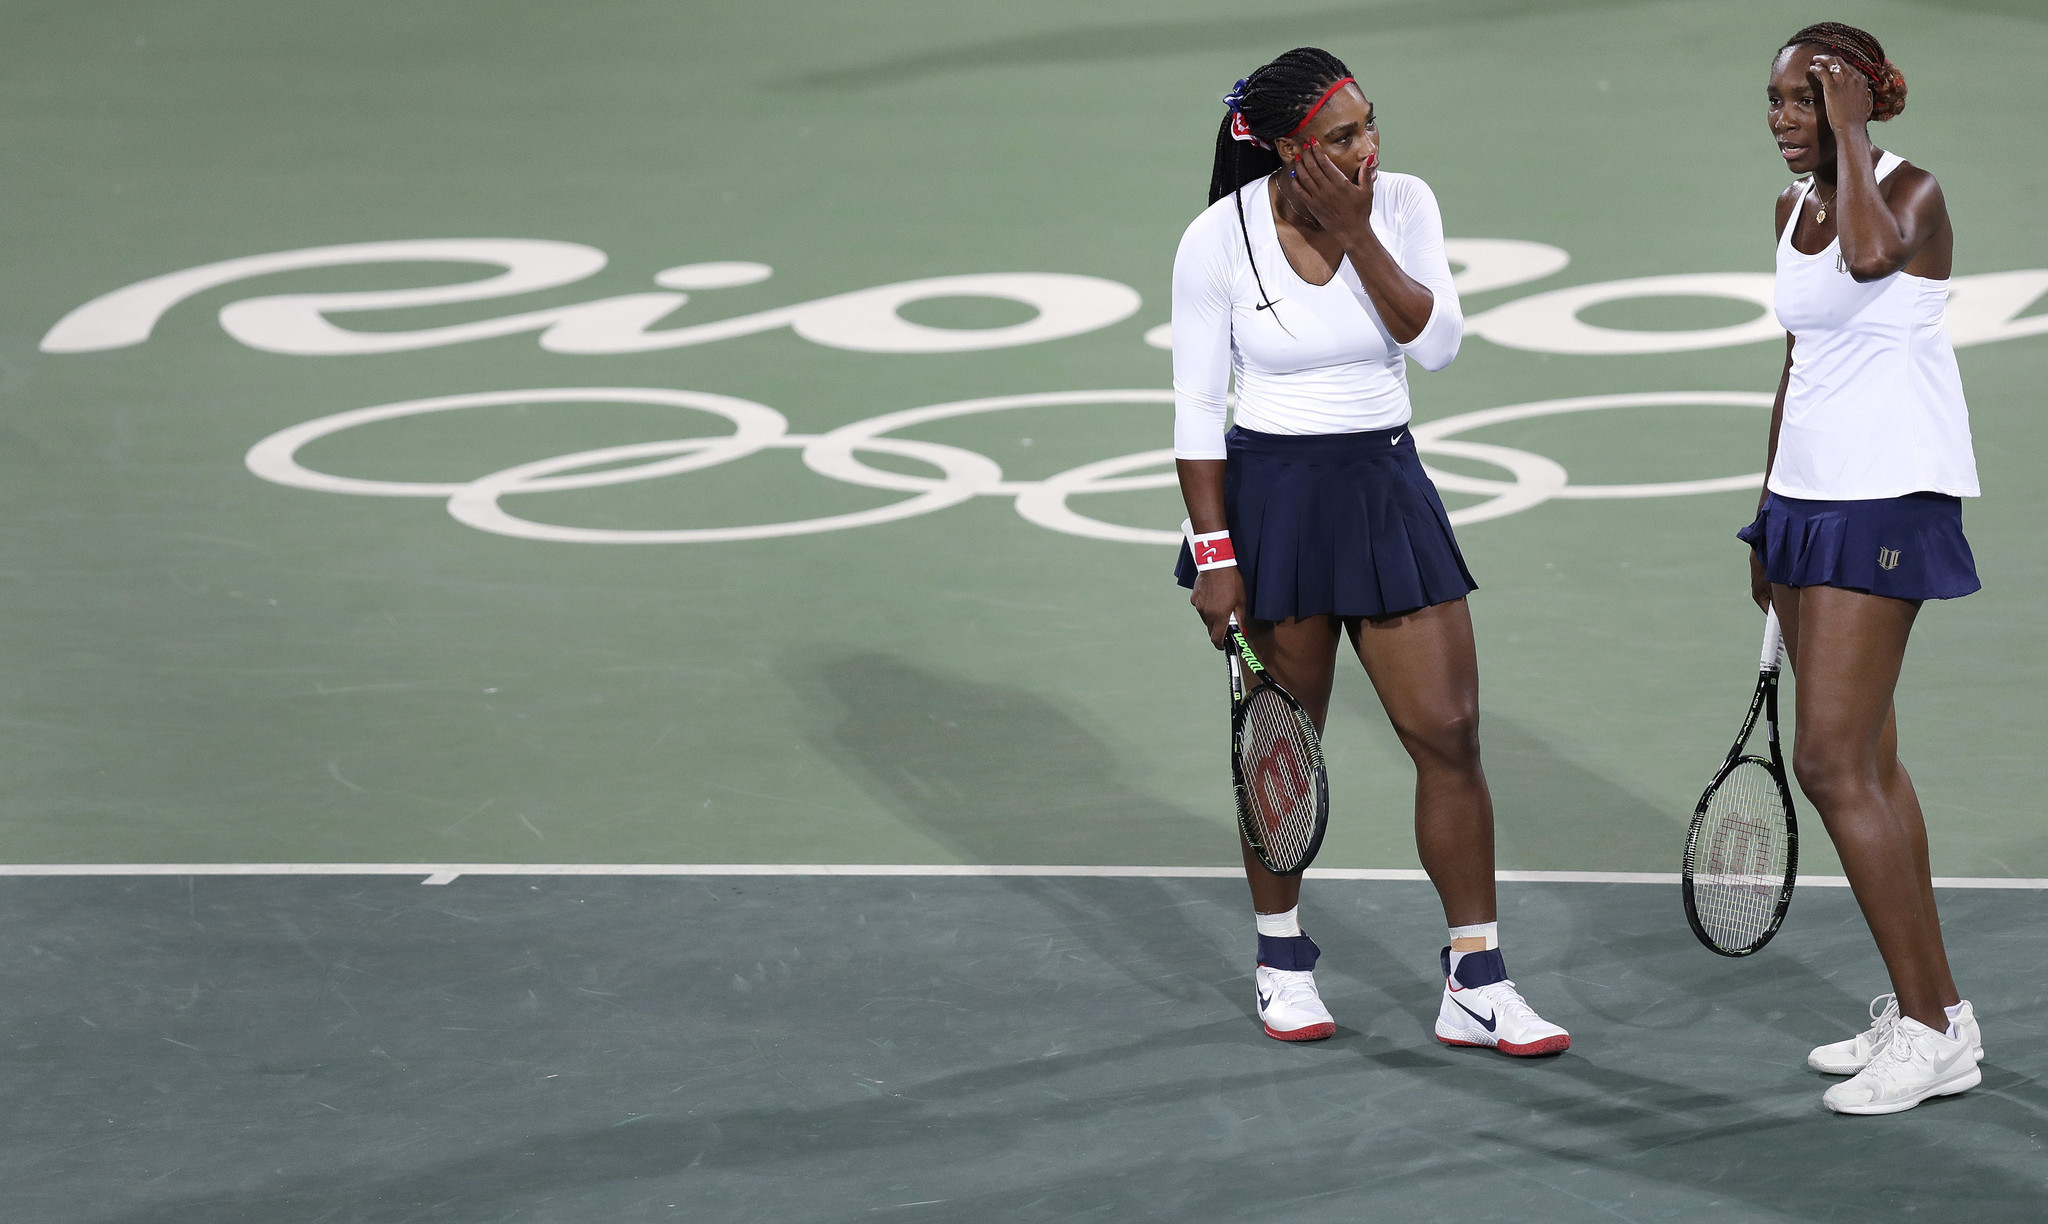 Williams sisters lose Olympic doubles match for 1st time - Chicago Tribune2048 x 1224